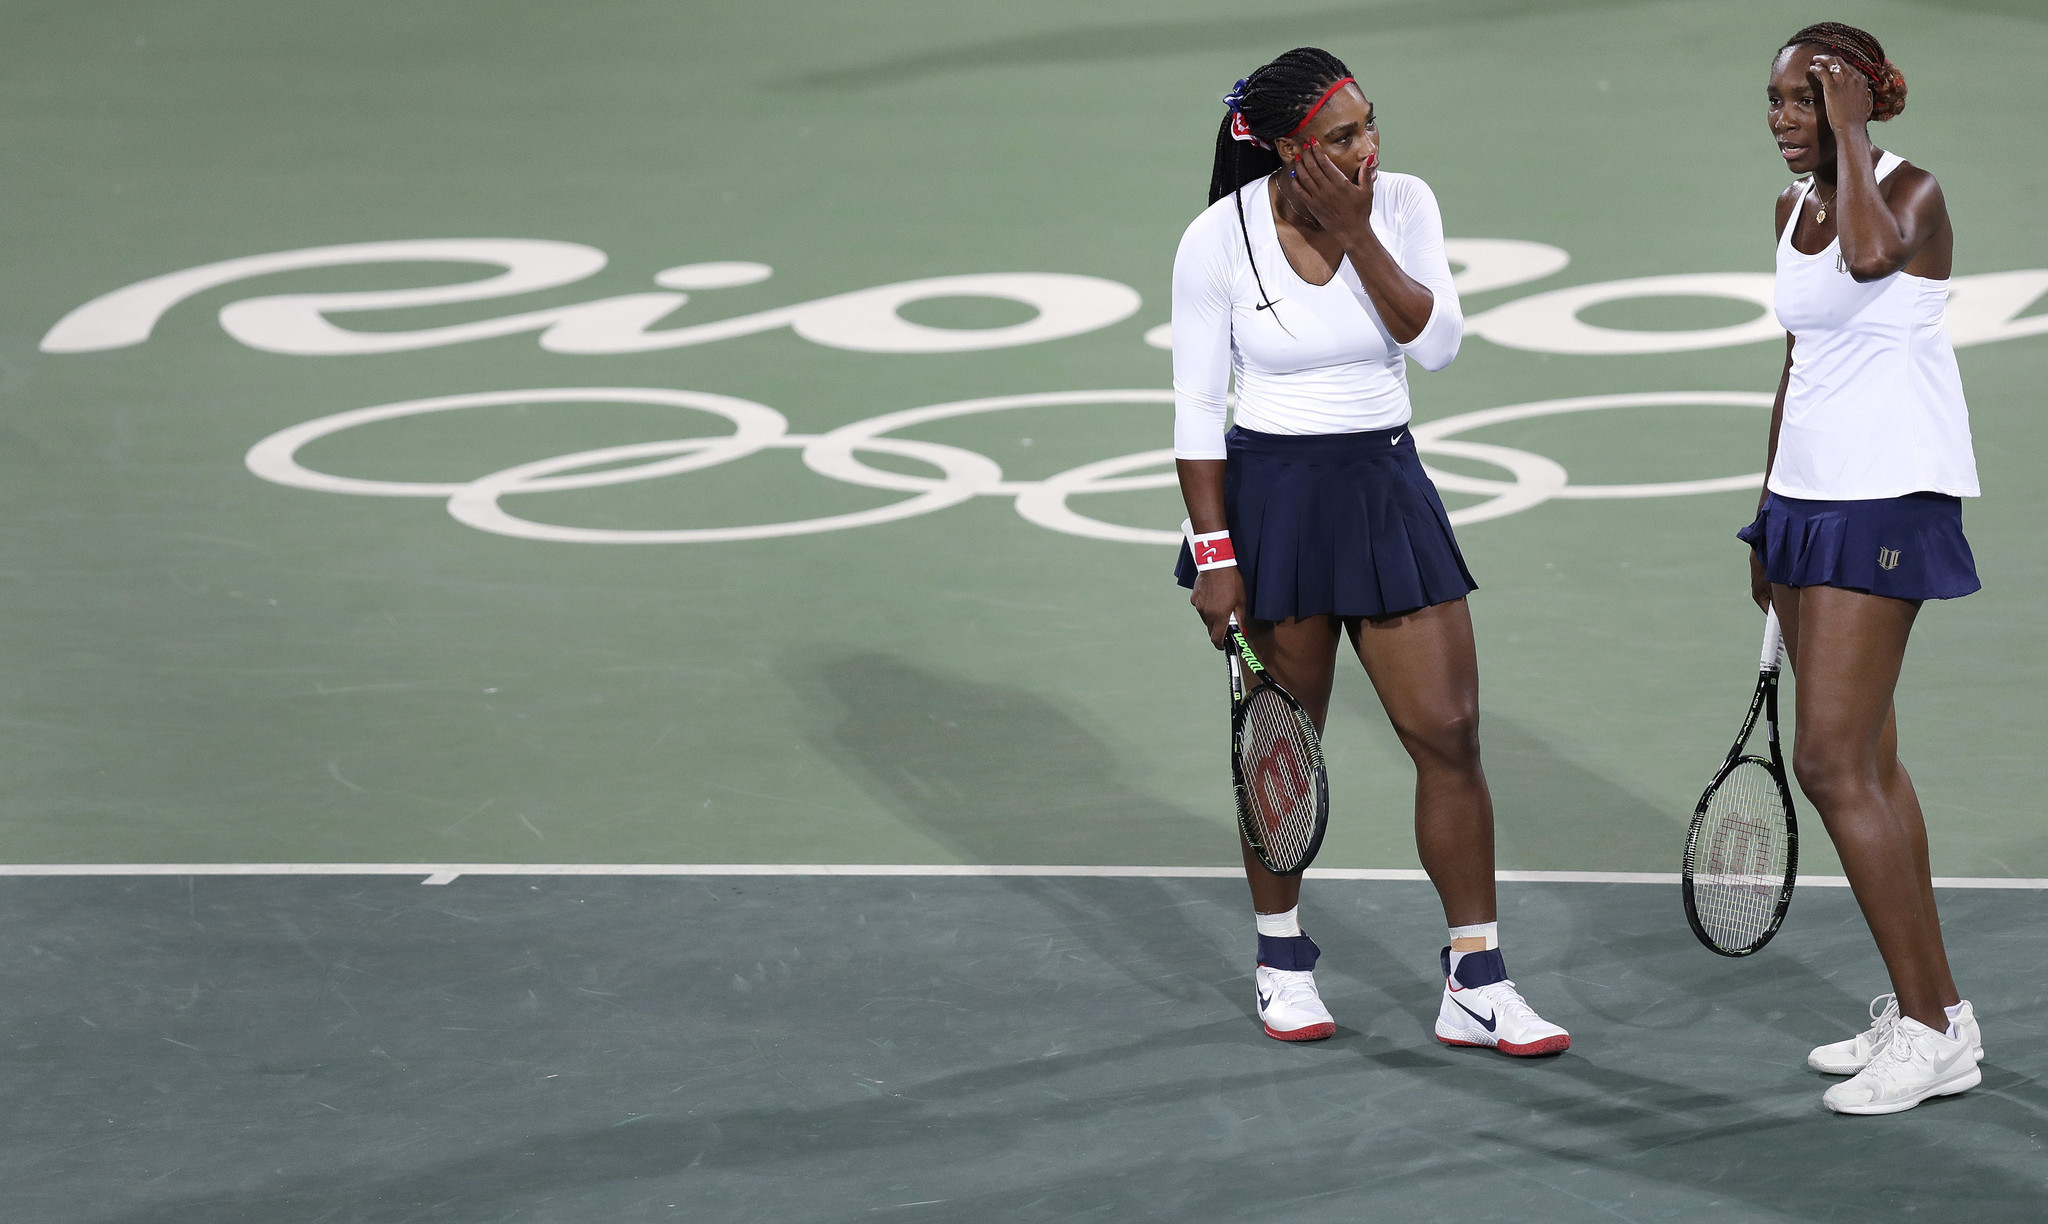 Williams sisters lose Olympic doubles match for 1st time - Chicago Tribune2048 x 1224